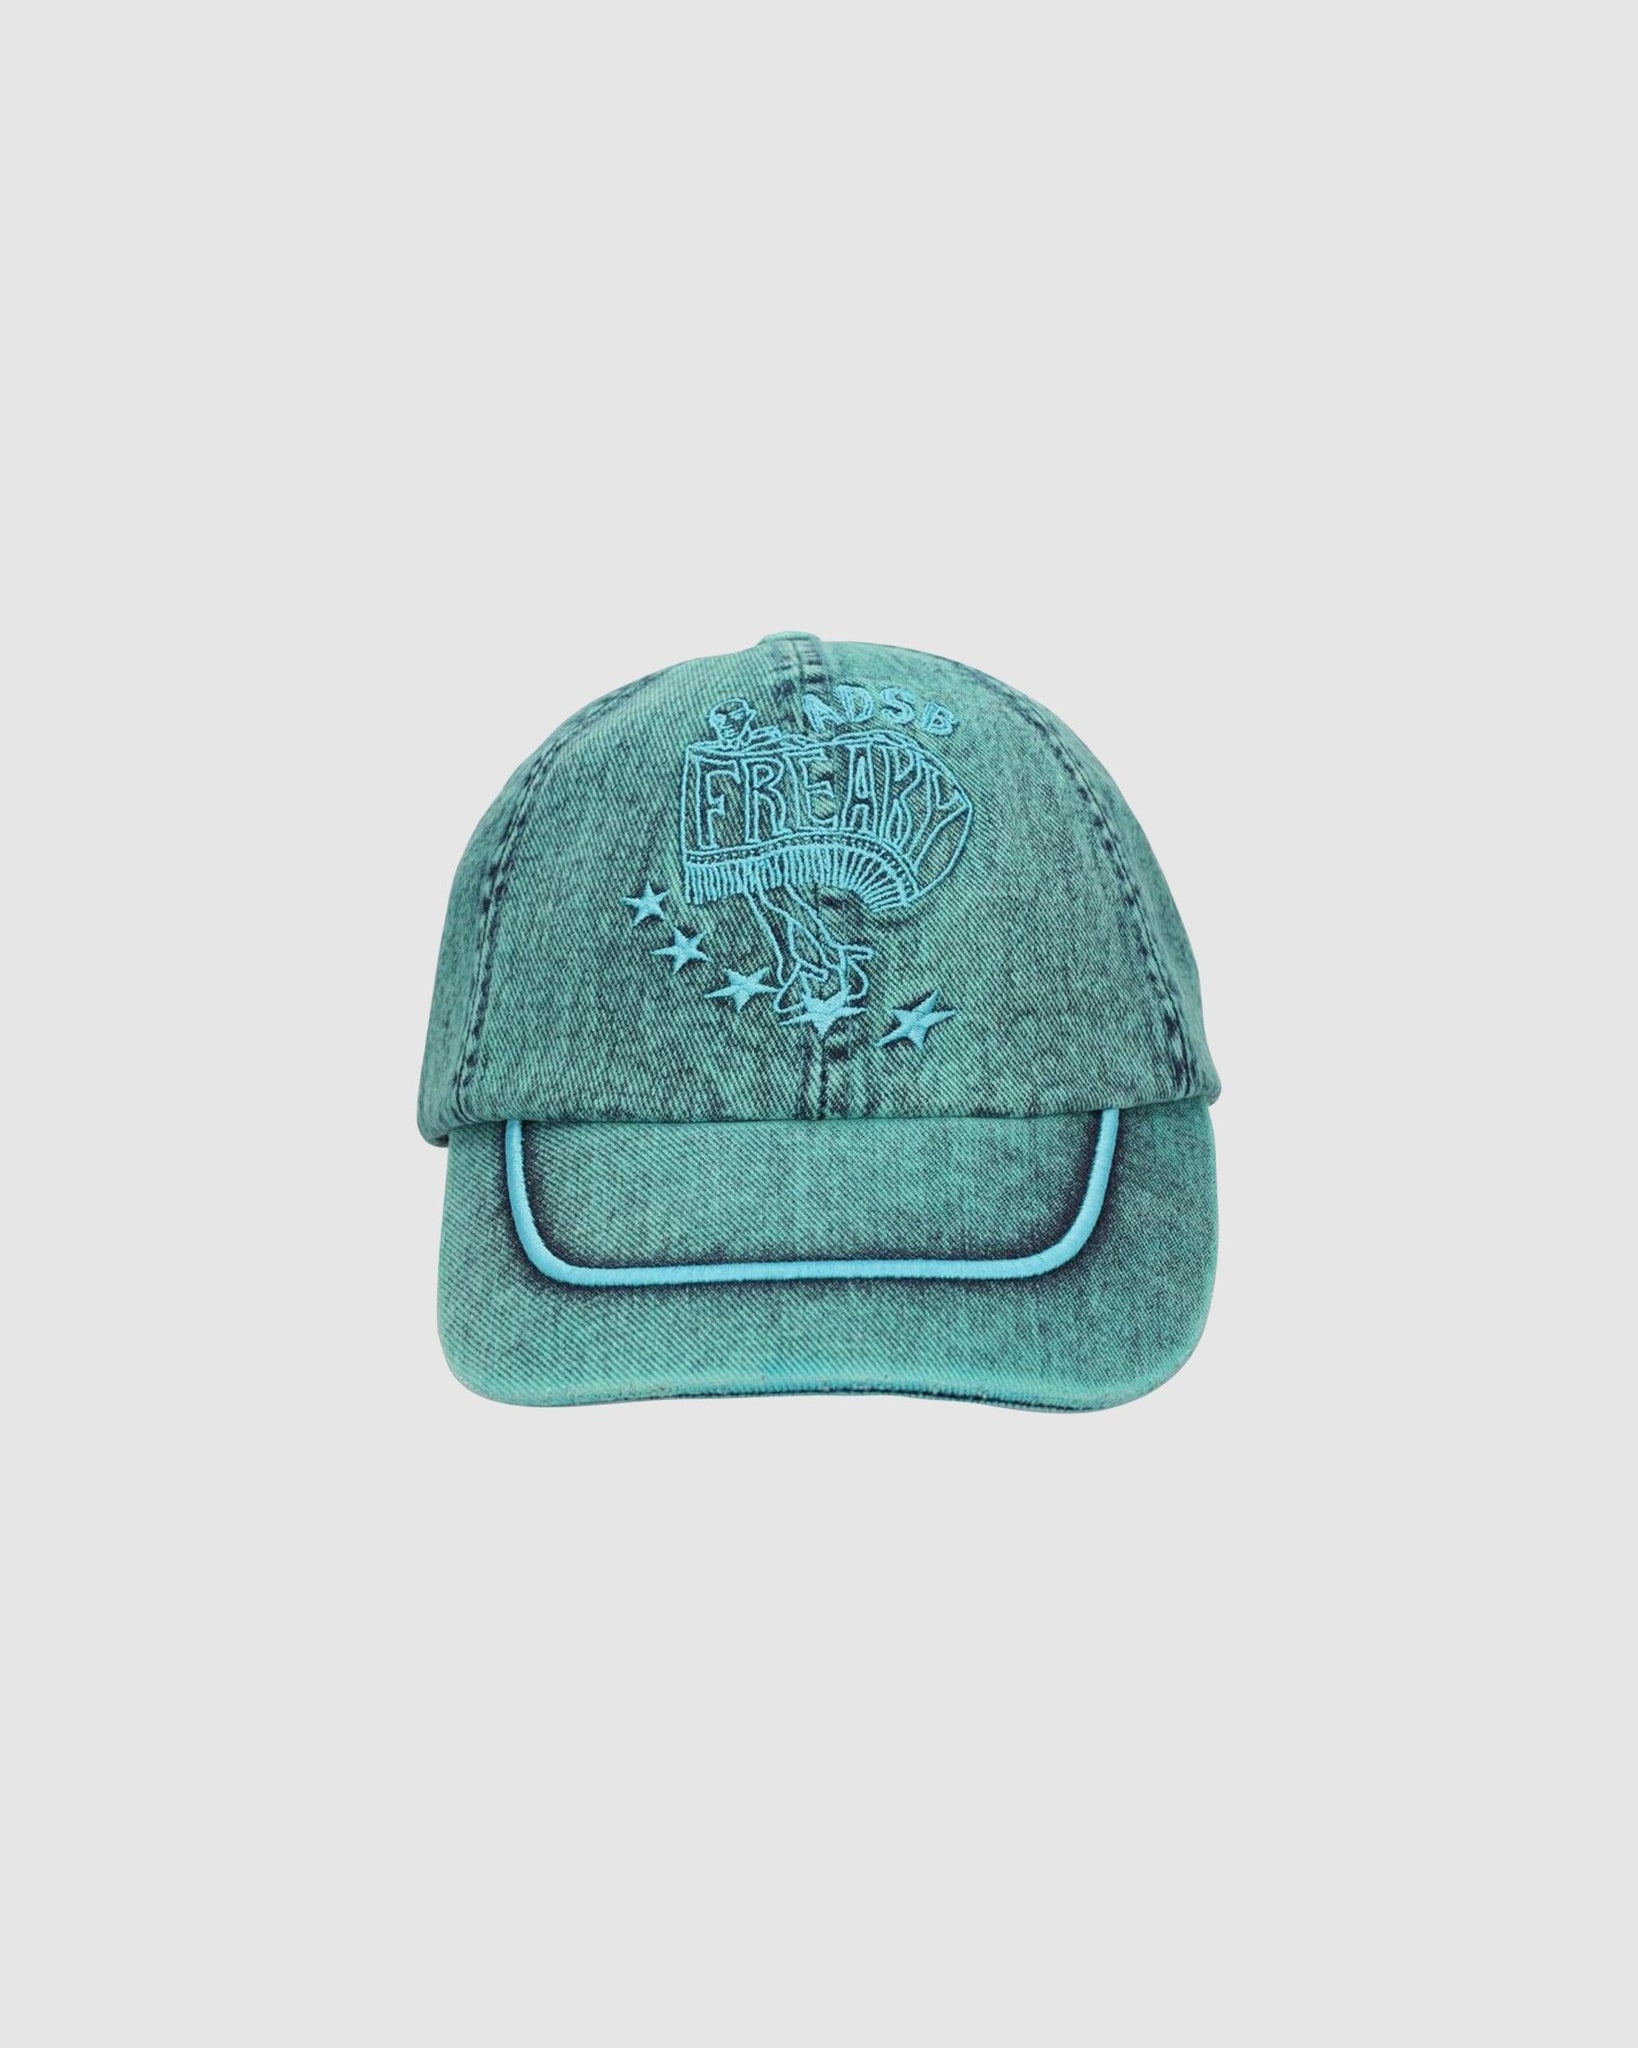 Freak ADSB Cap - {{ collection.title }} - Chinatown Country Club 